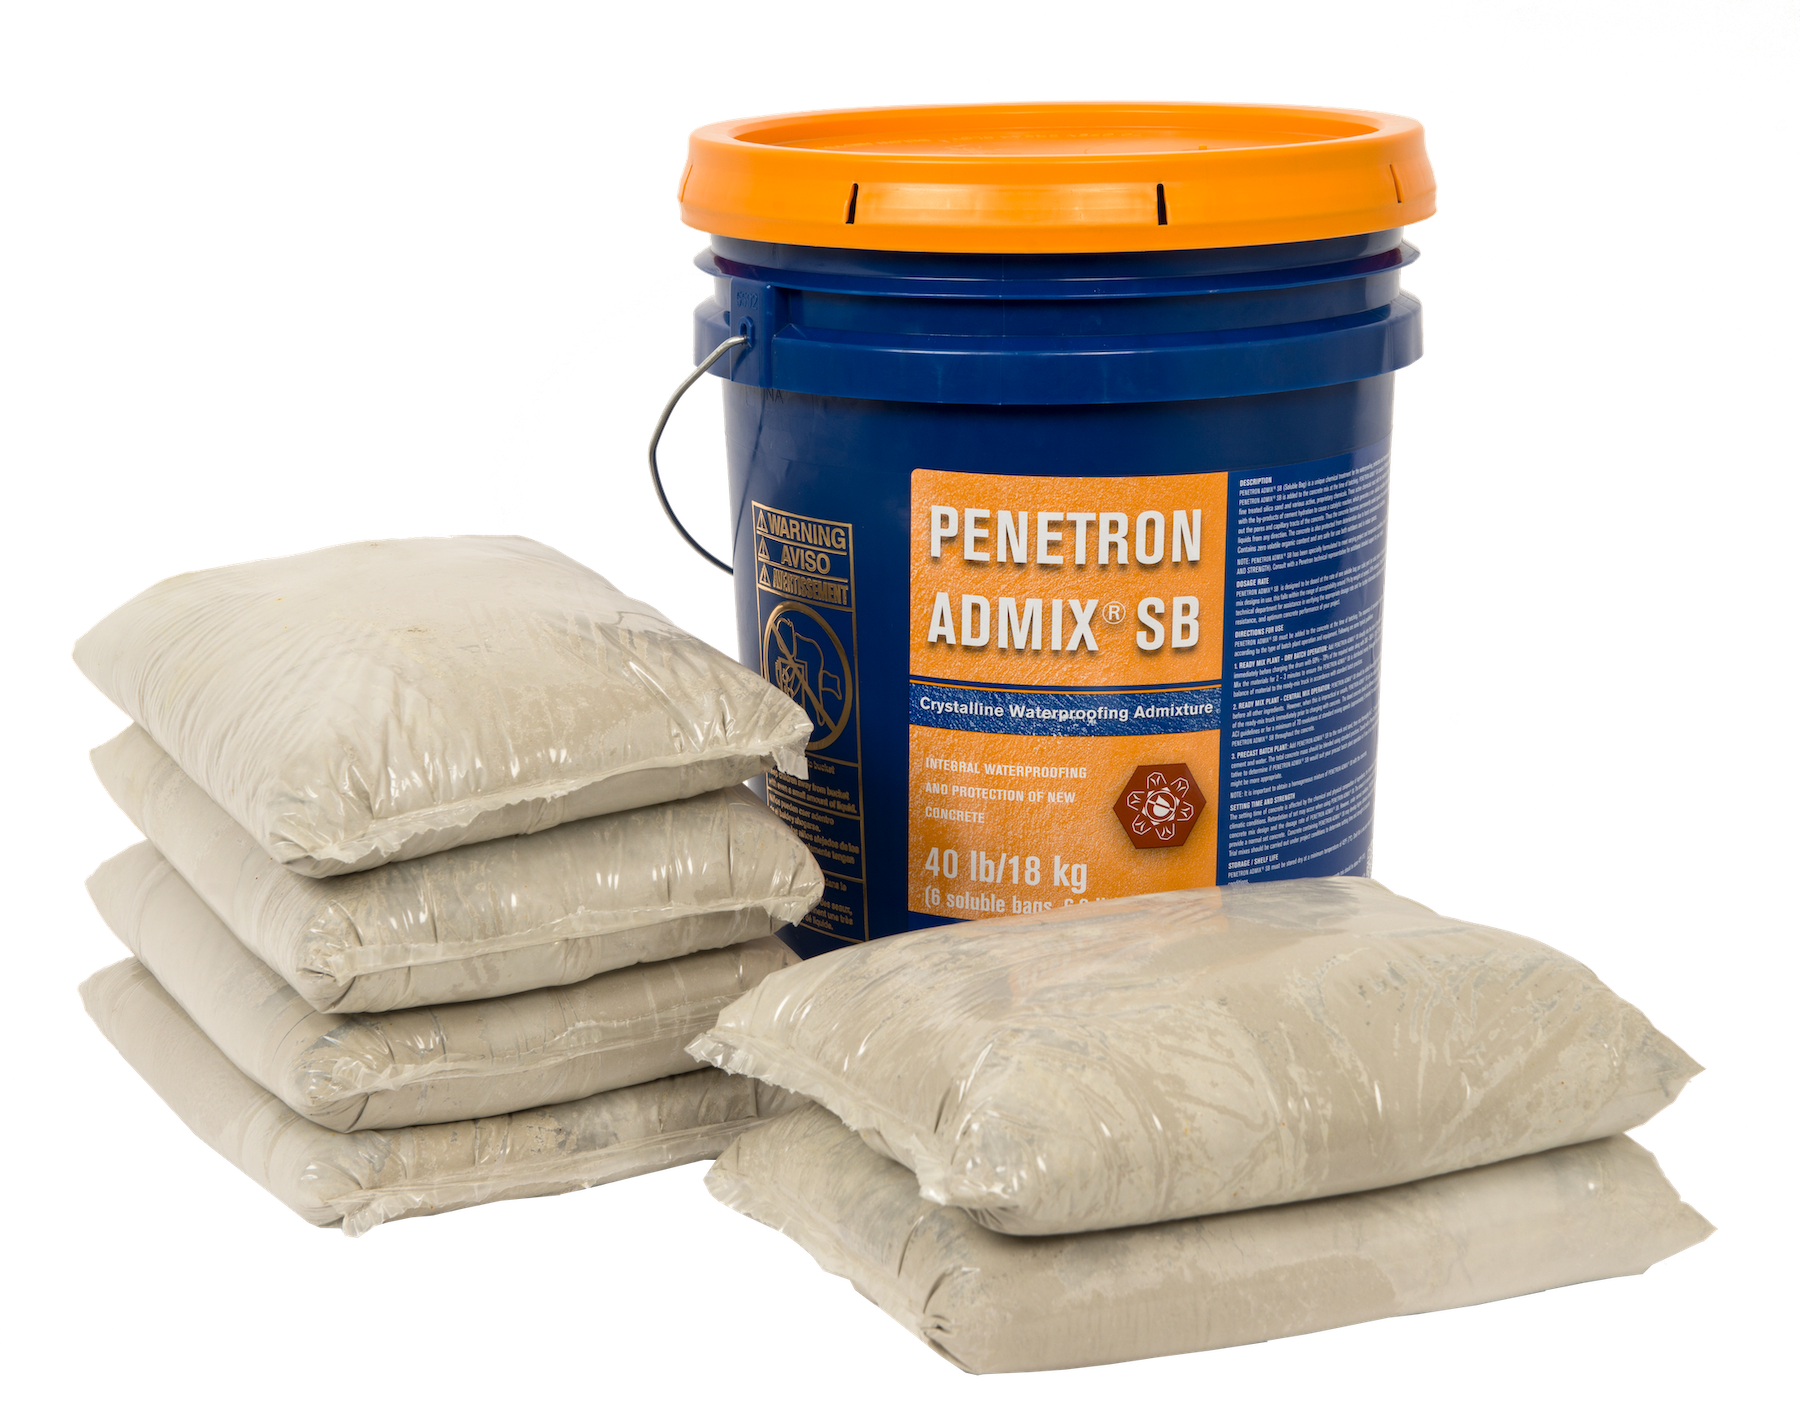 Lowering concrete permeability: PENETRON ADMIX helps concrete resist aggressive chemicals in the soil, the road salts from the trucks, and the high water table at the I-40 truck inspection site.